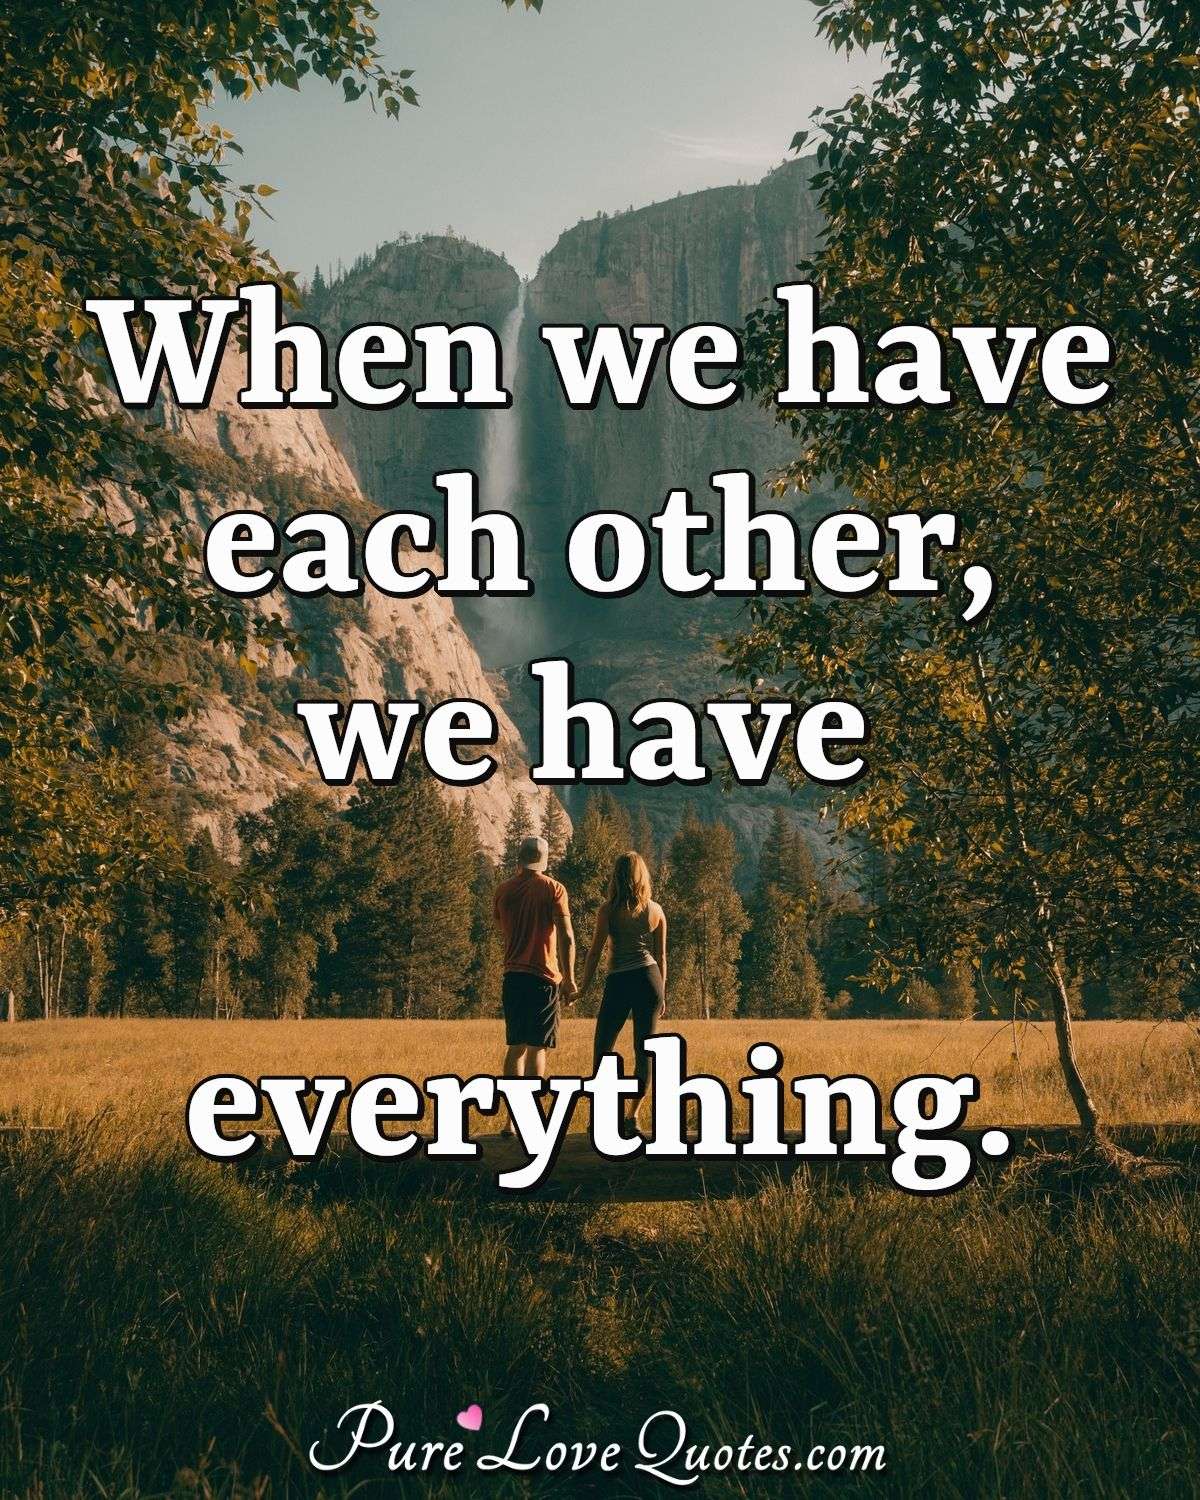 When we have each other, we have everything. - Anonymous